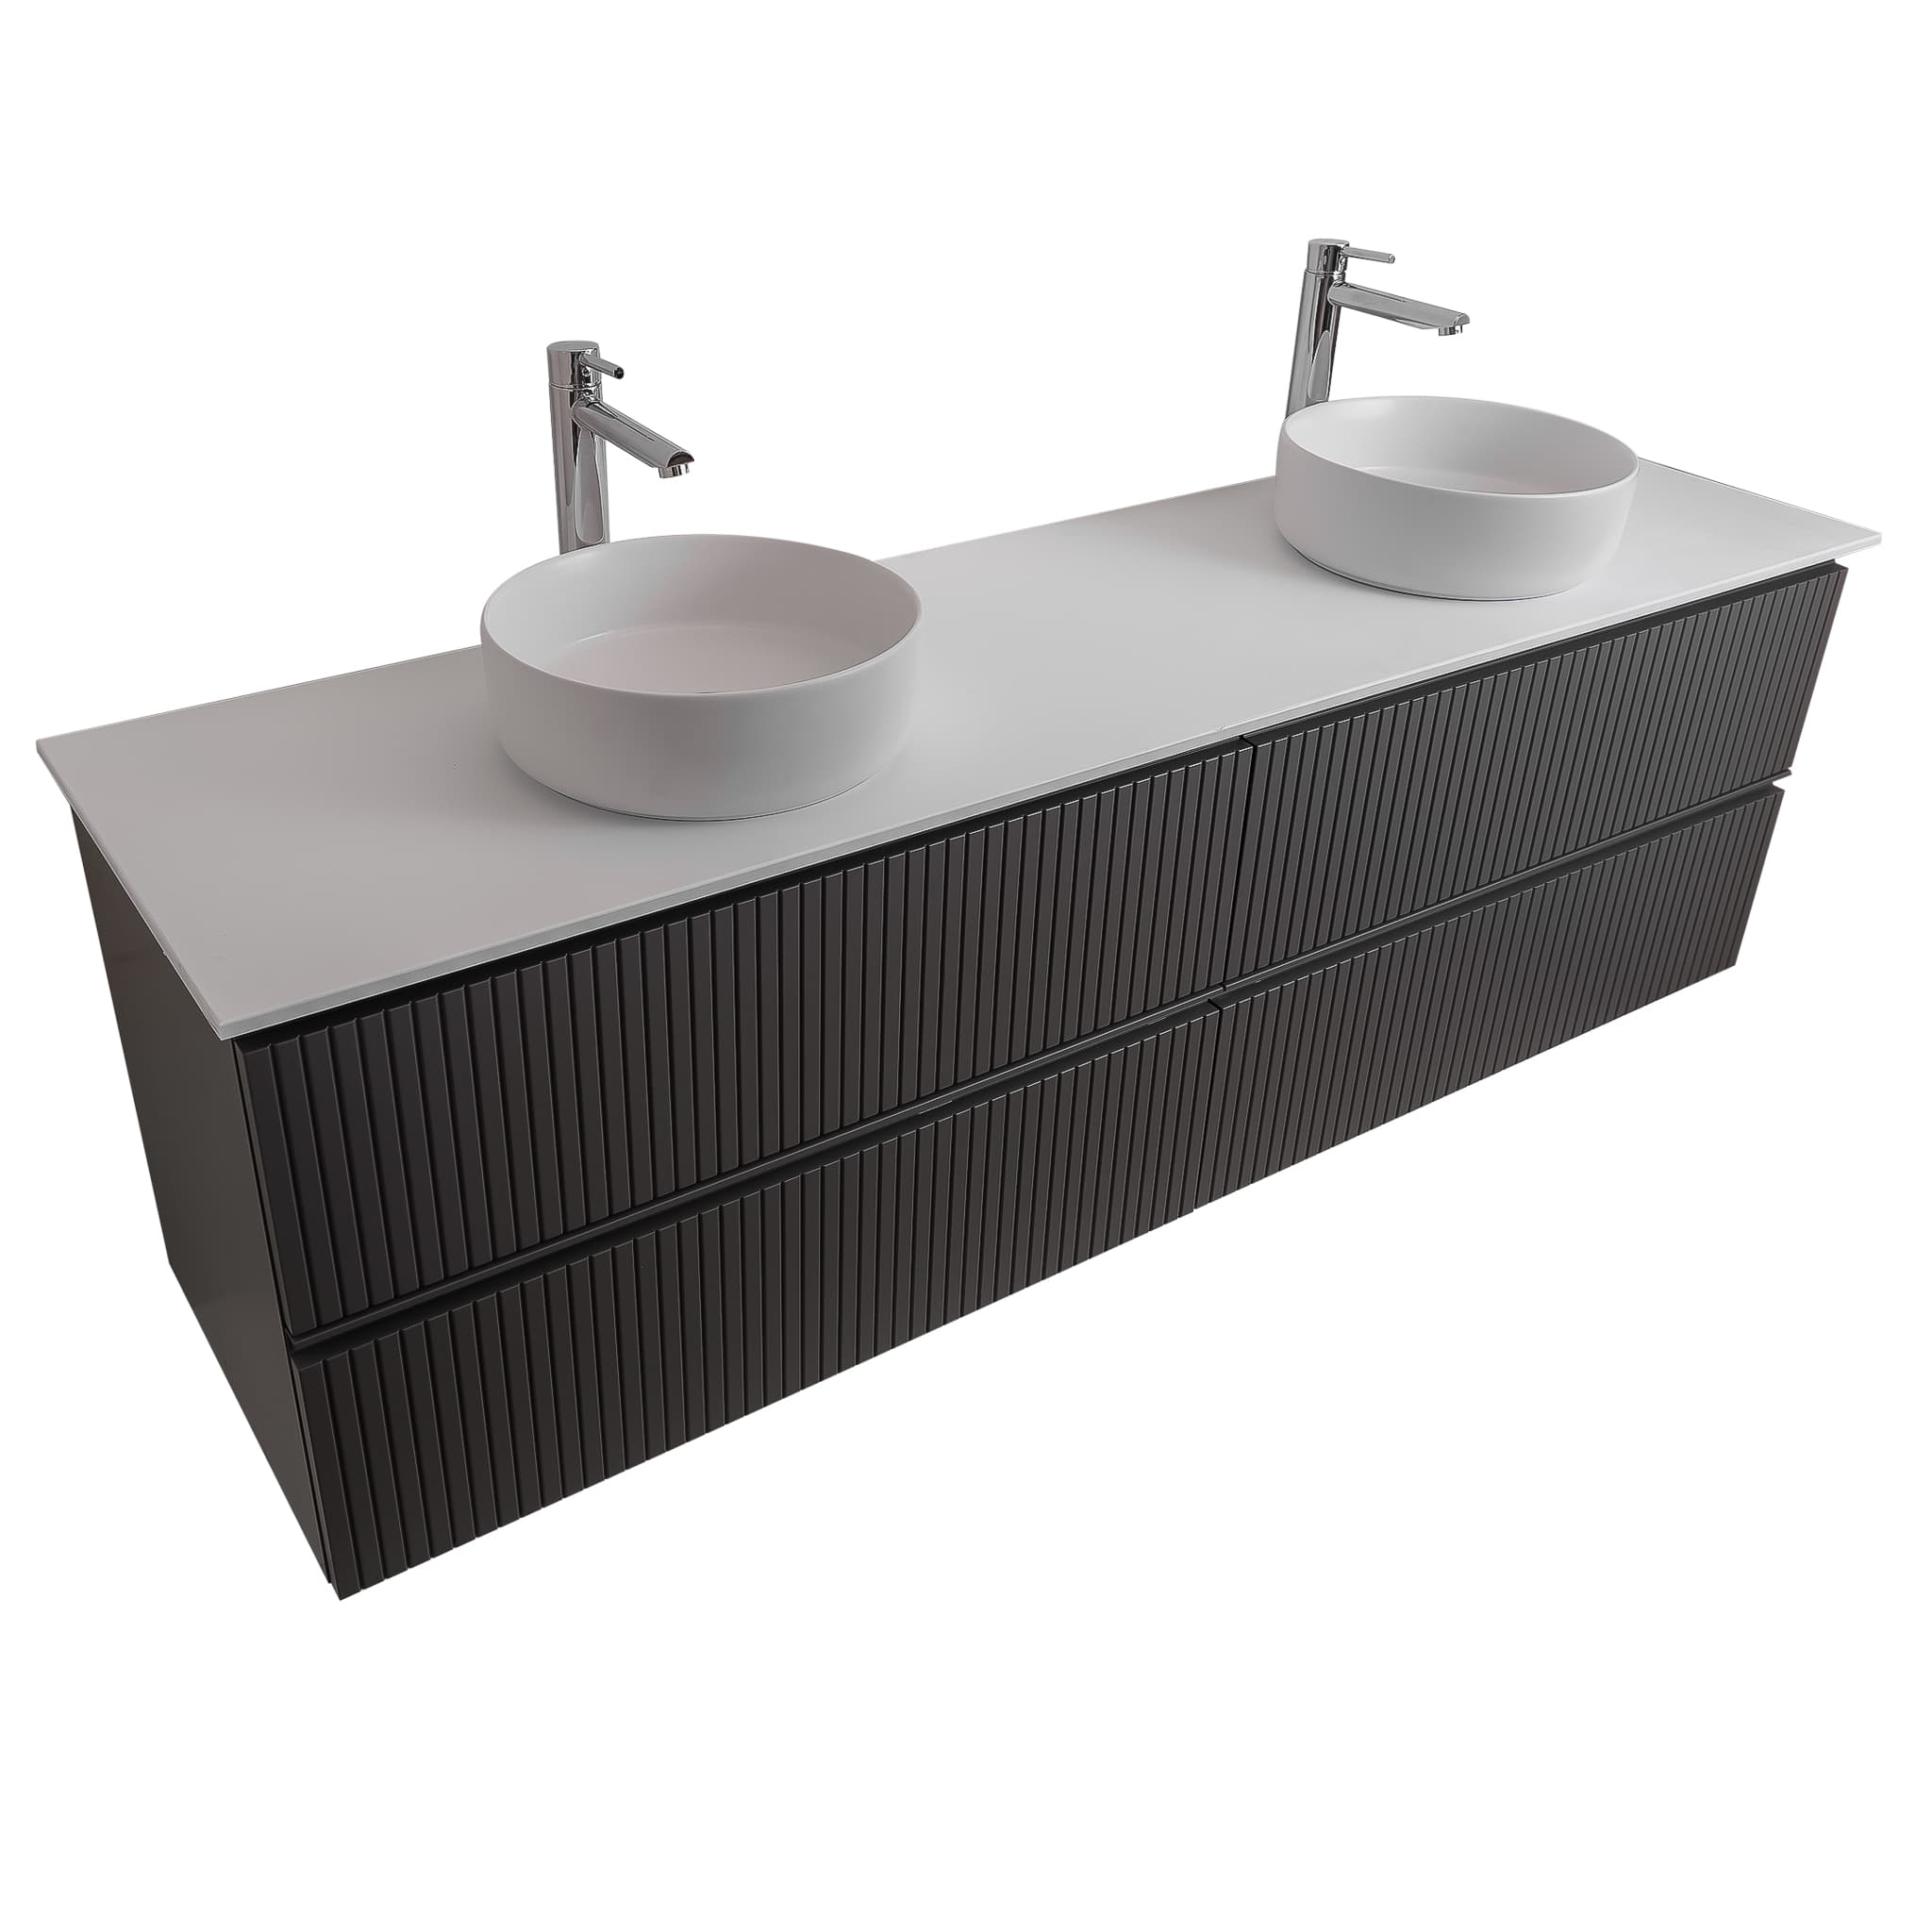 Ares 63 Matte Grey Cabinet, Ares White Top And Two Ares White Ceramic Basin, Wall Mounted Modern Vanity Set